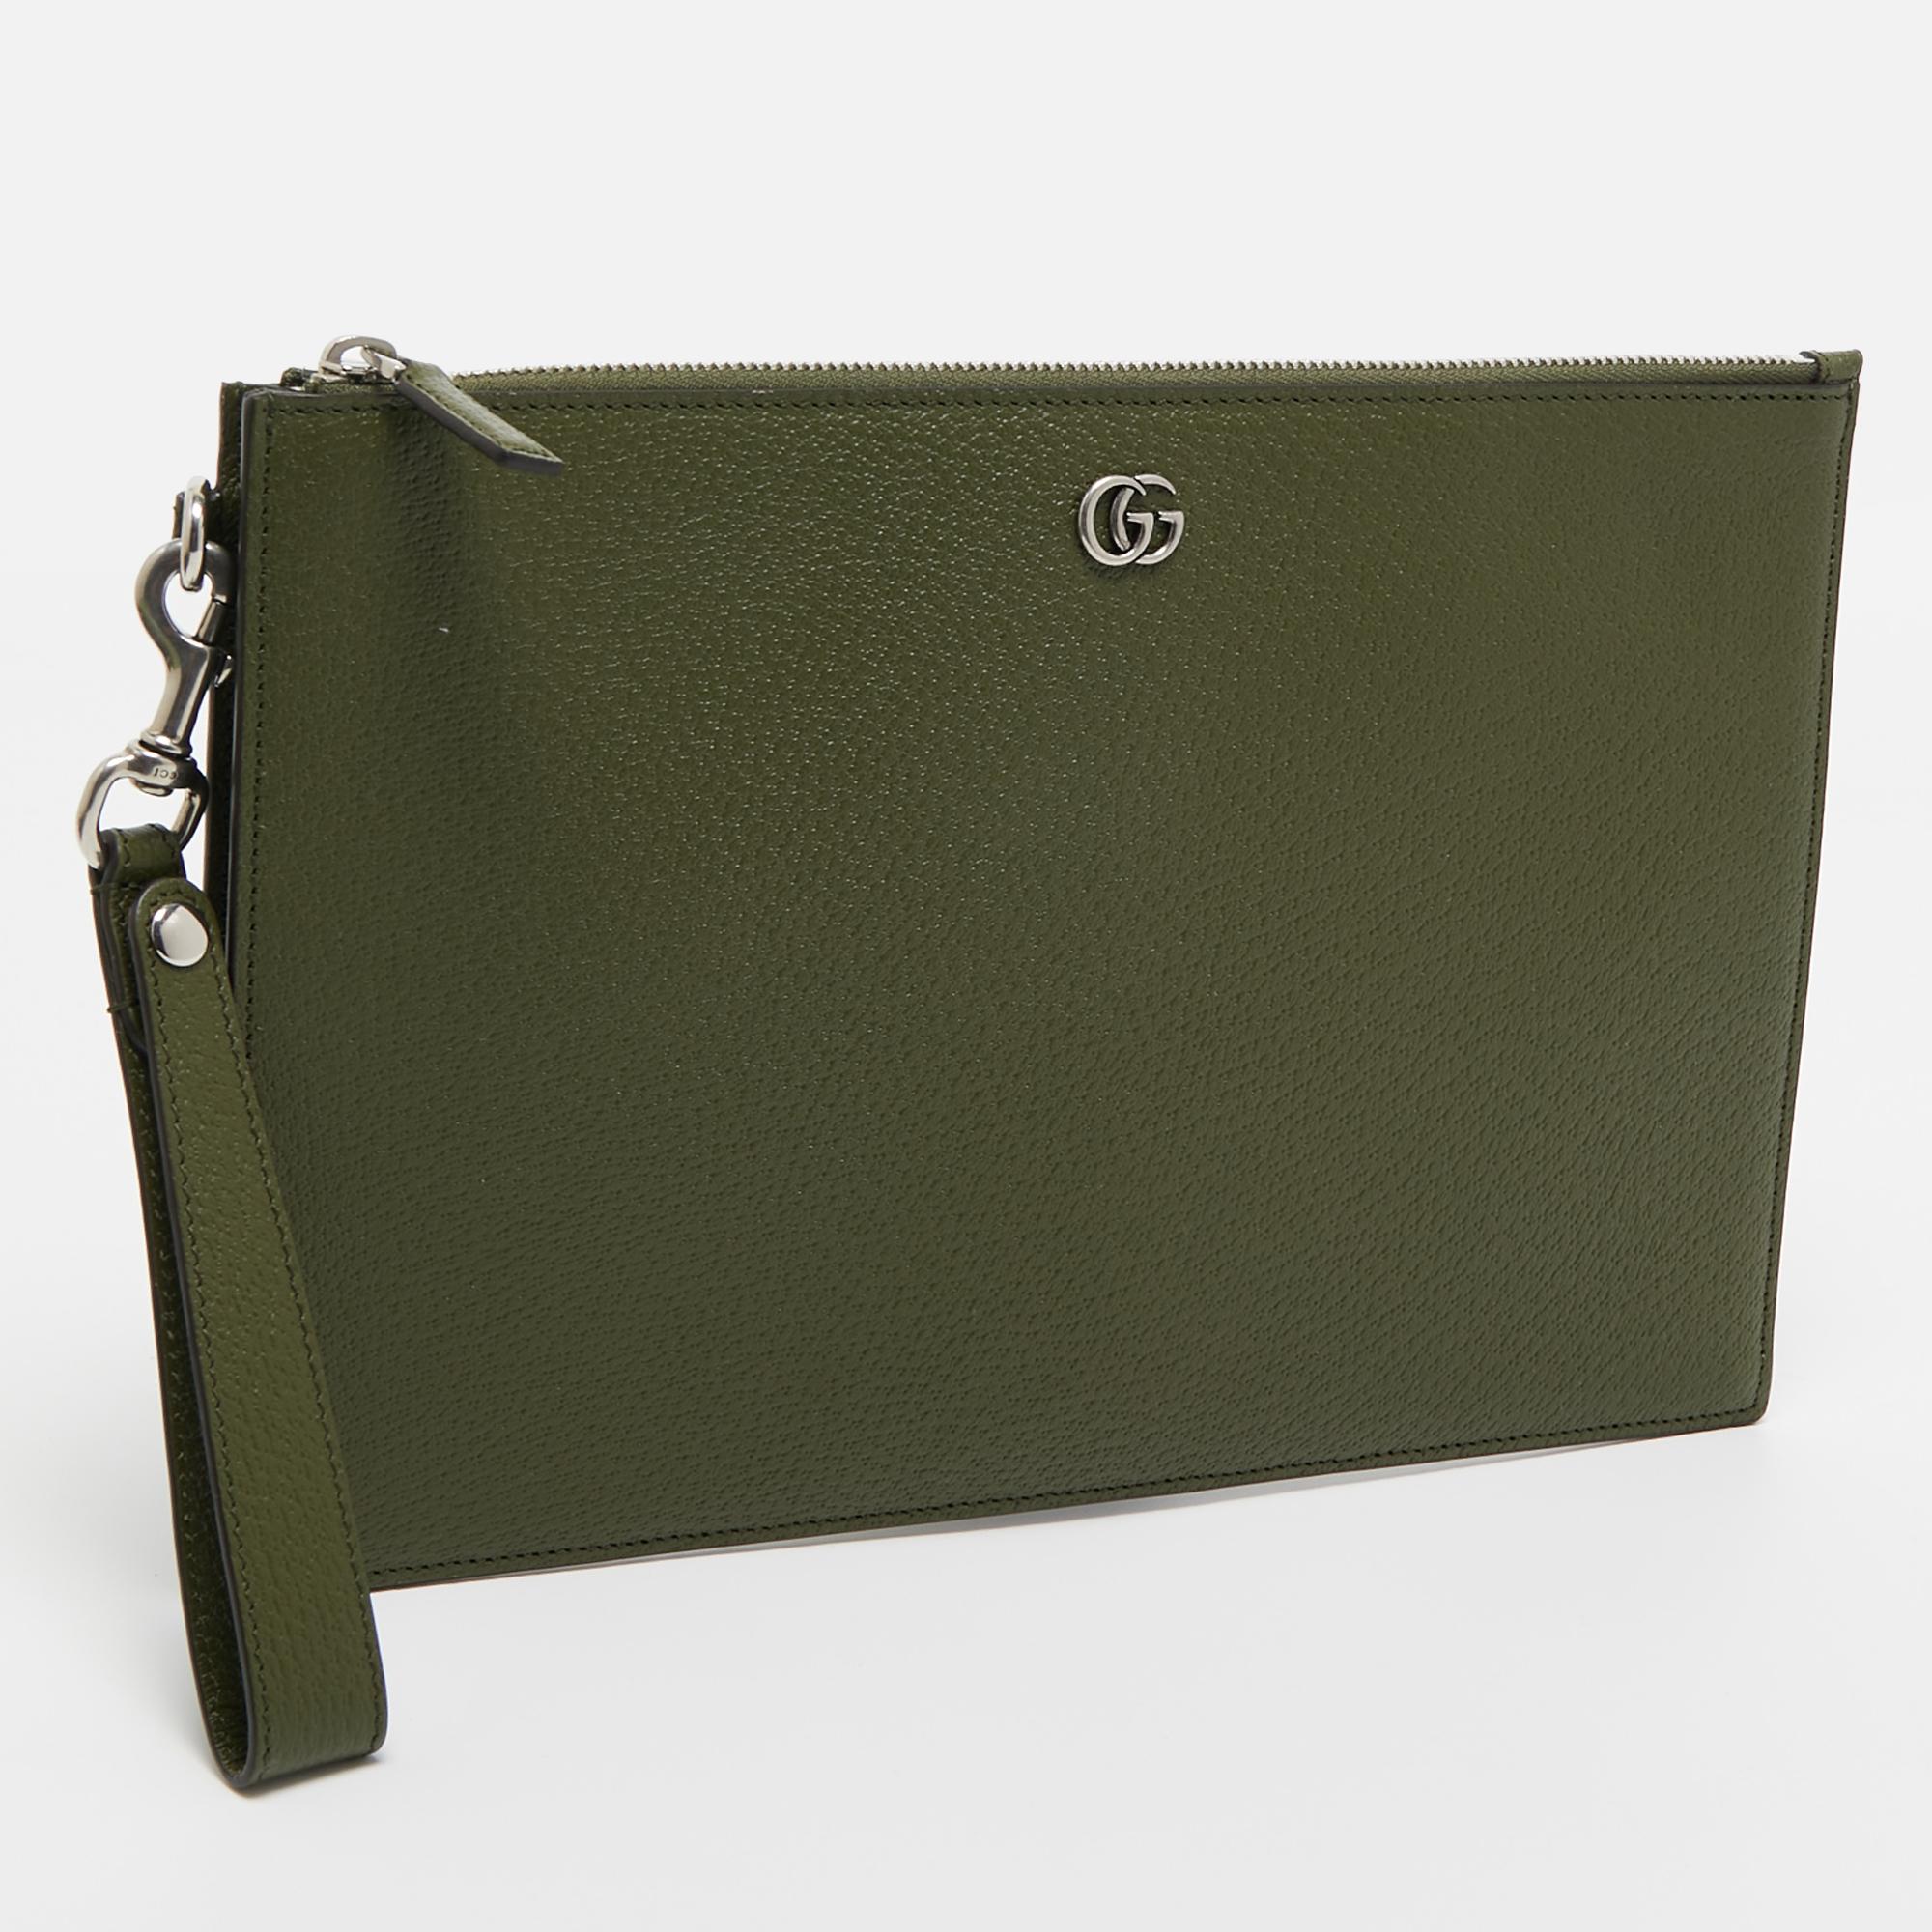 Easy to hold and perfect for housing your phone, keys, and cardholder, this Gucci pouch is a must-have. It is made of green leather and elevated with the GG logo on the front.

